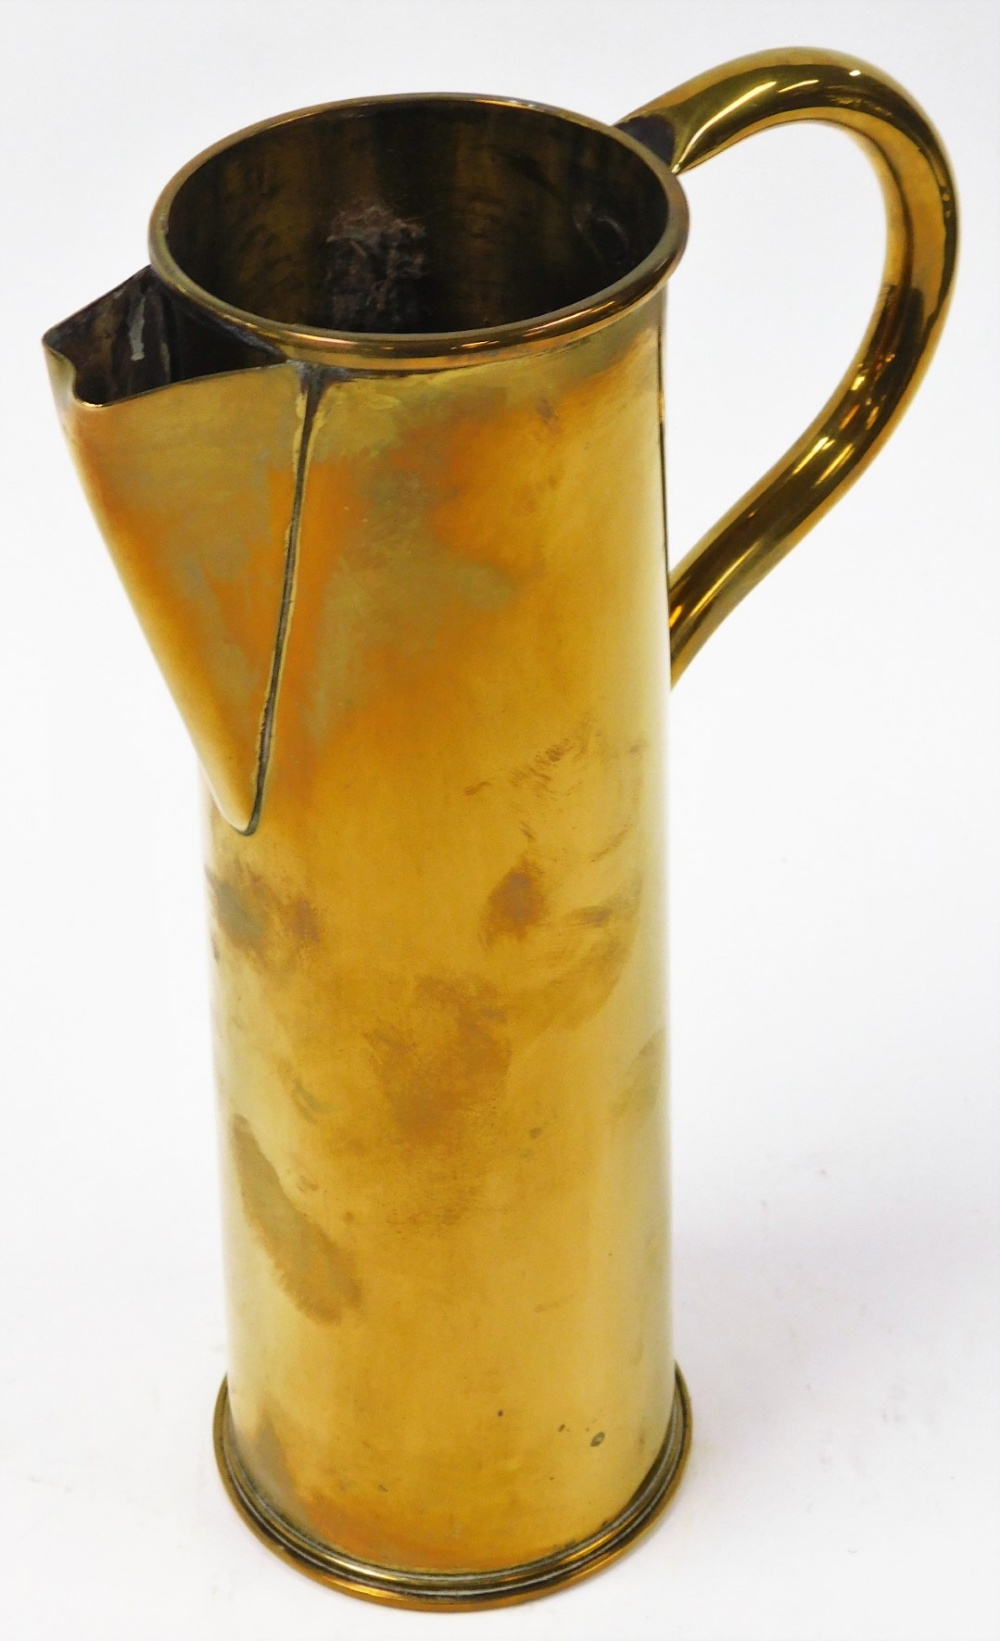 A brass shell case converted to a jug, the shell case stamped 4/16 EWBC, with conversion with spout